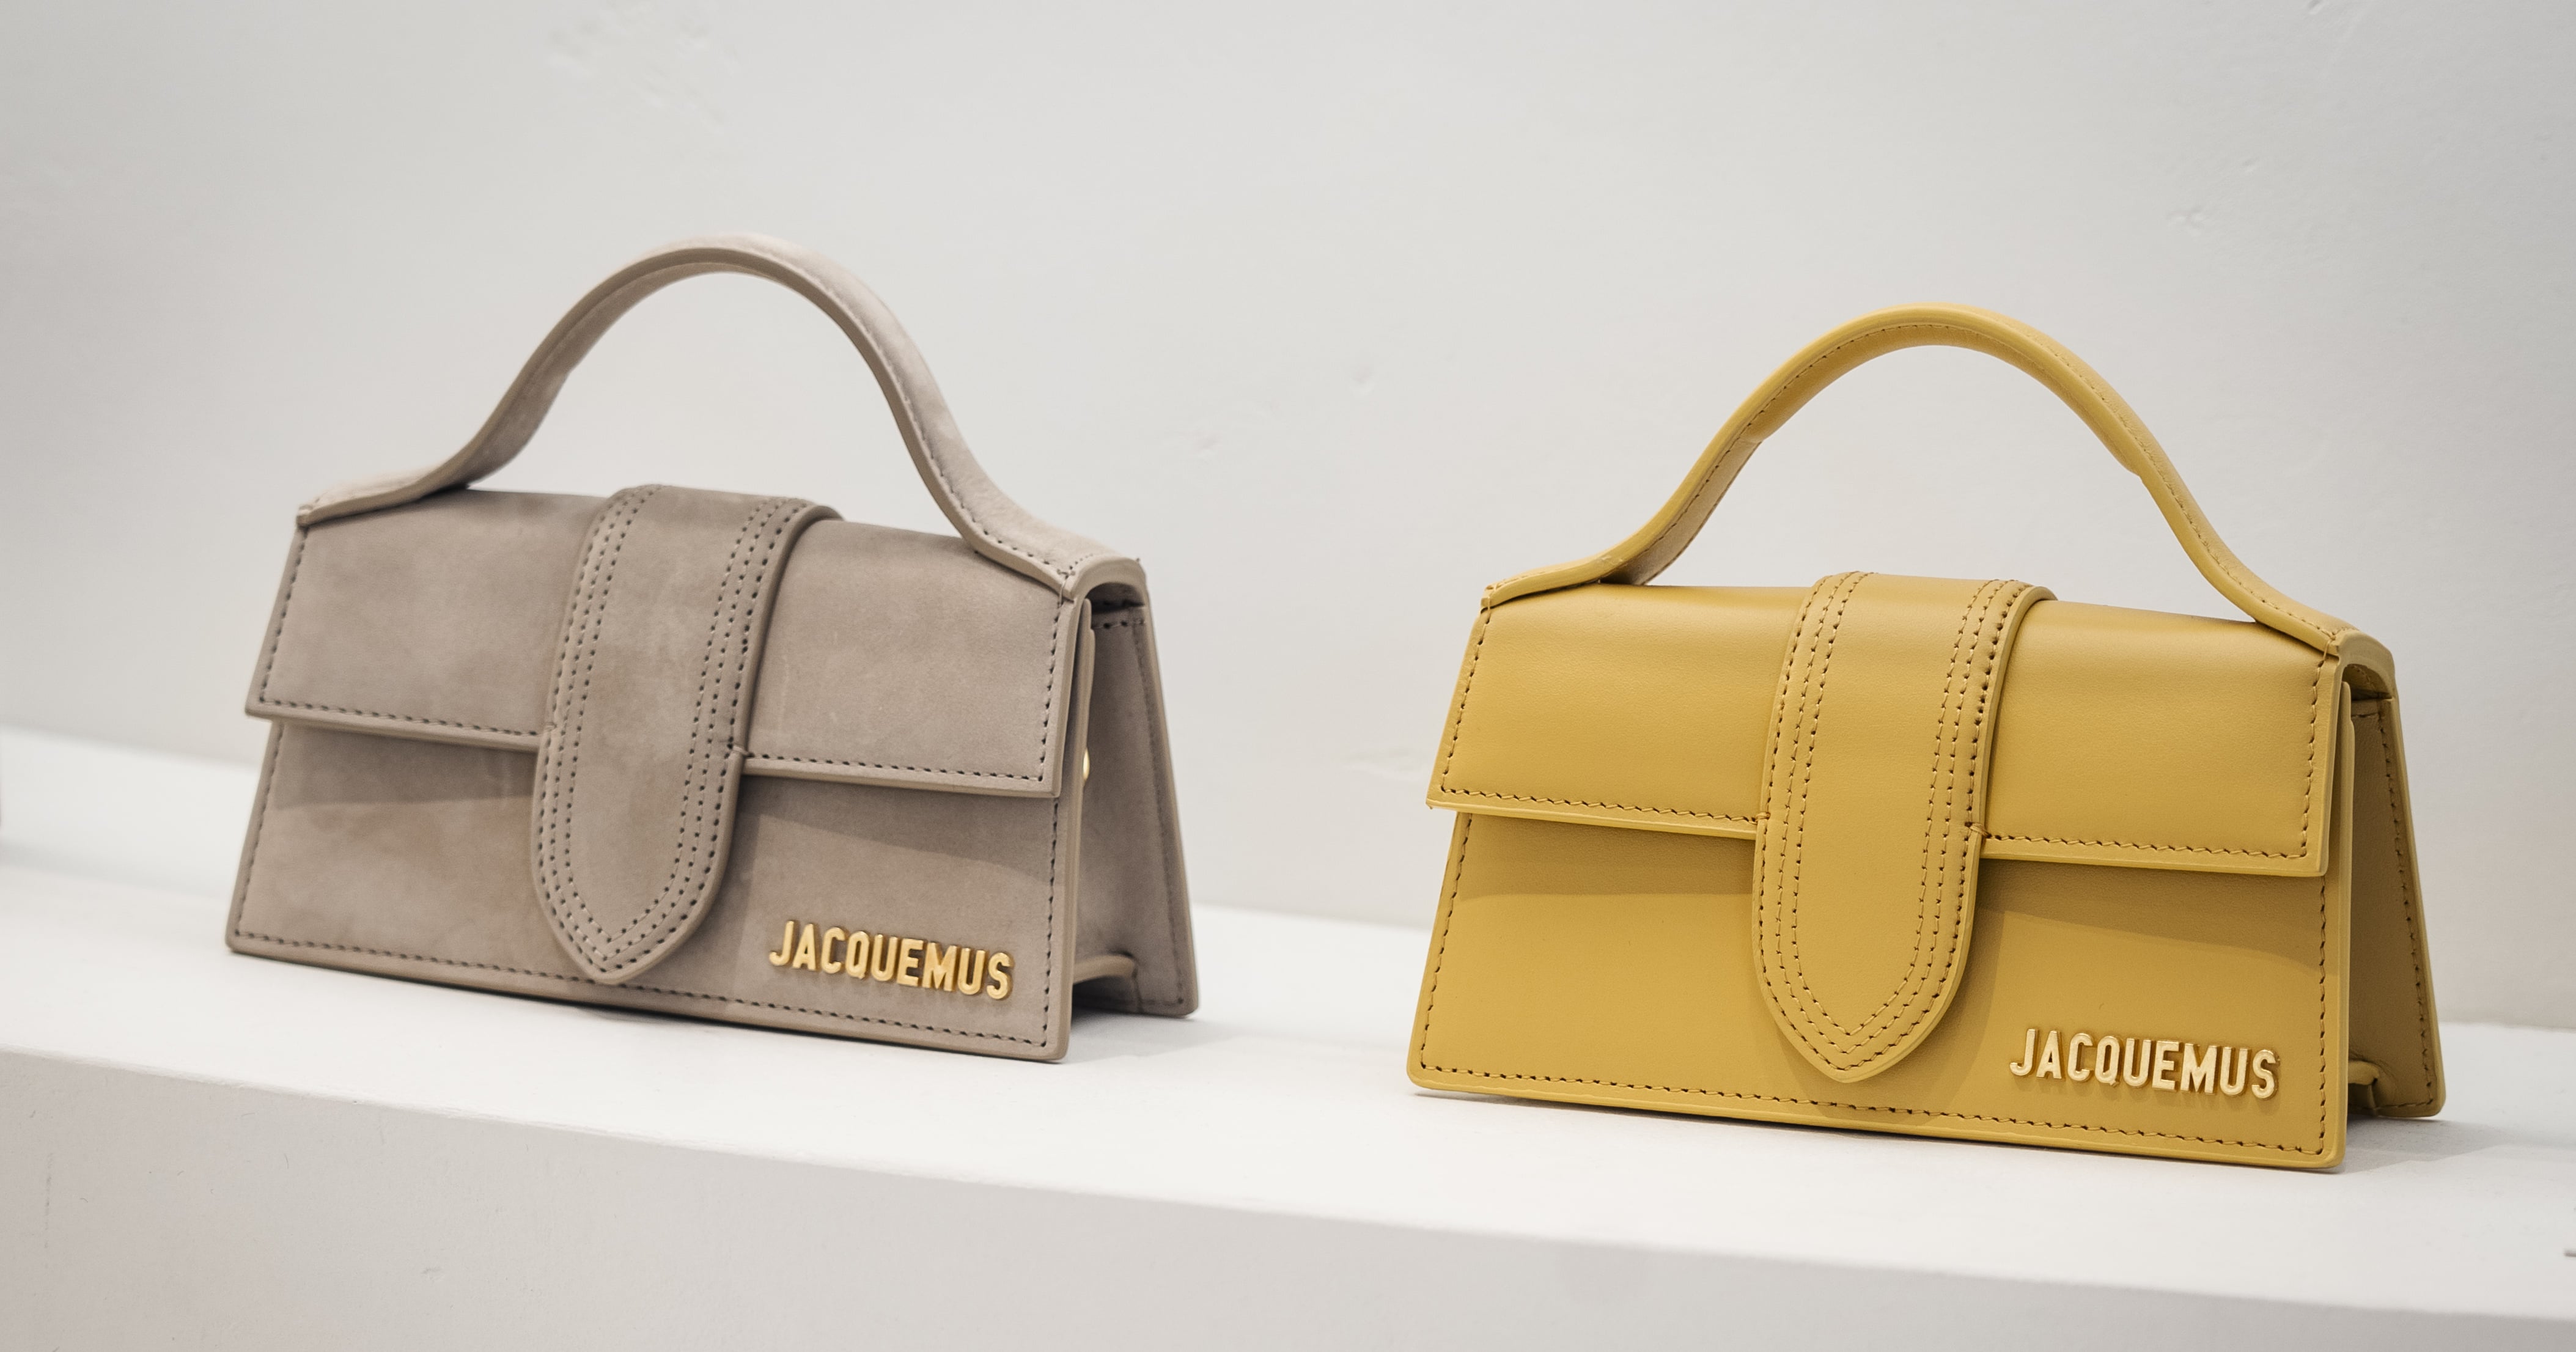 A History of Ginormous and Ridiculously Tiny Handbags